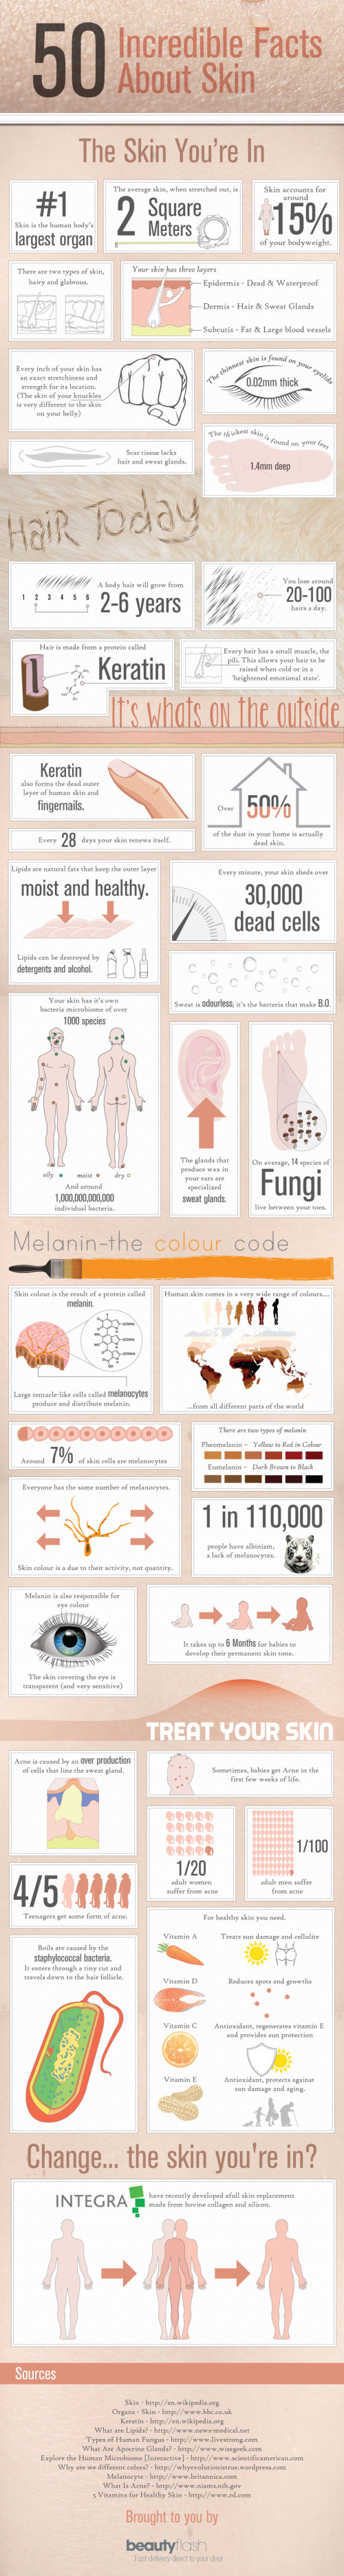 50 Incredible Facts About Skin infographic